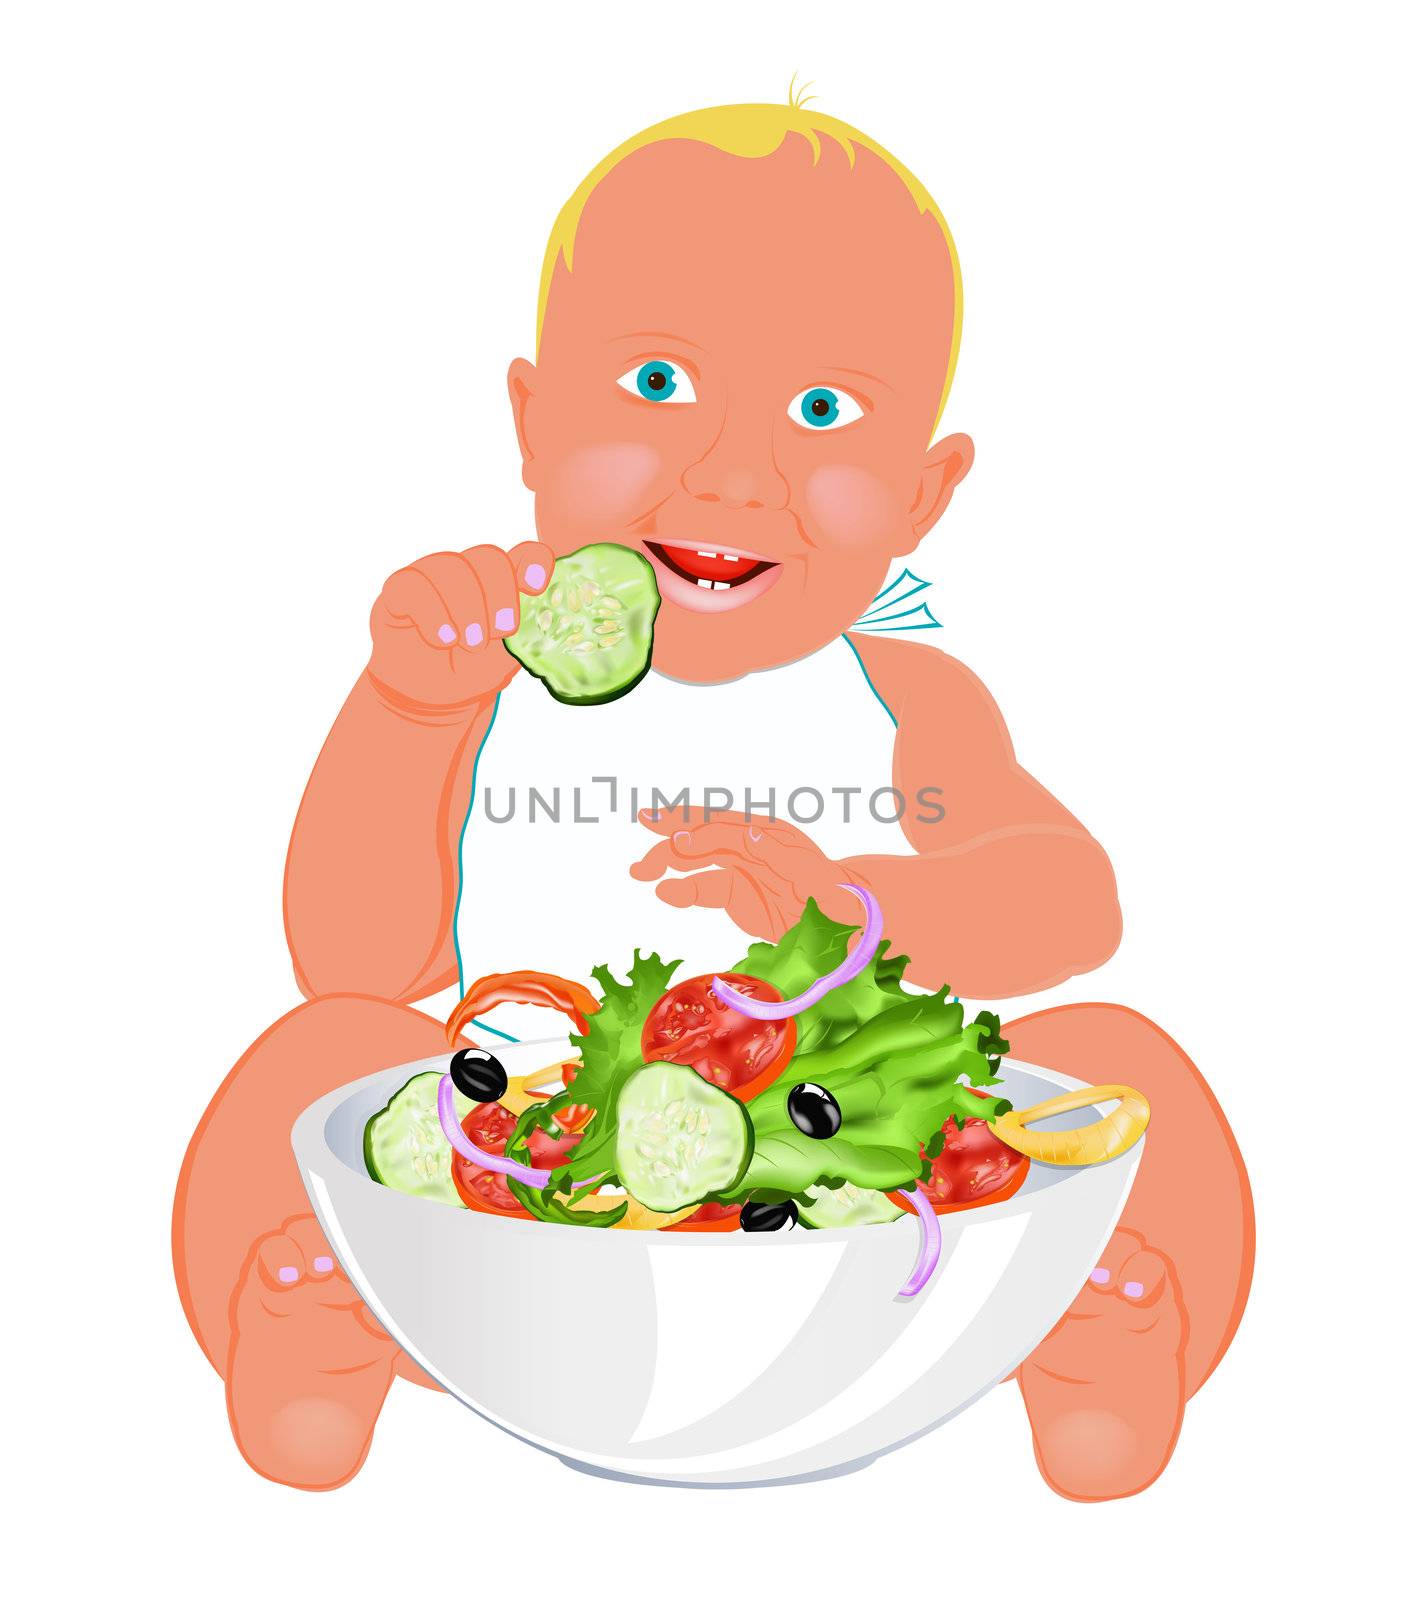 Child and fresh vegetable salad on a white background by sergey150770SV